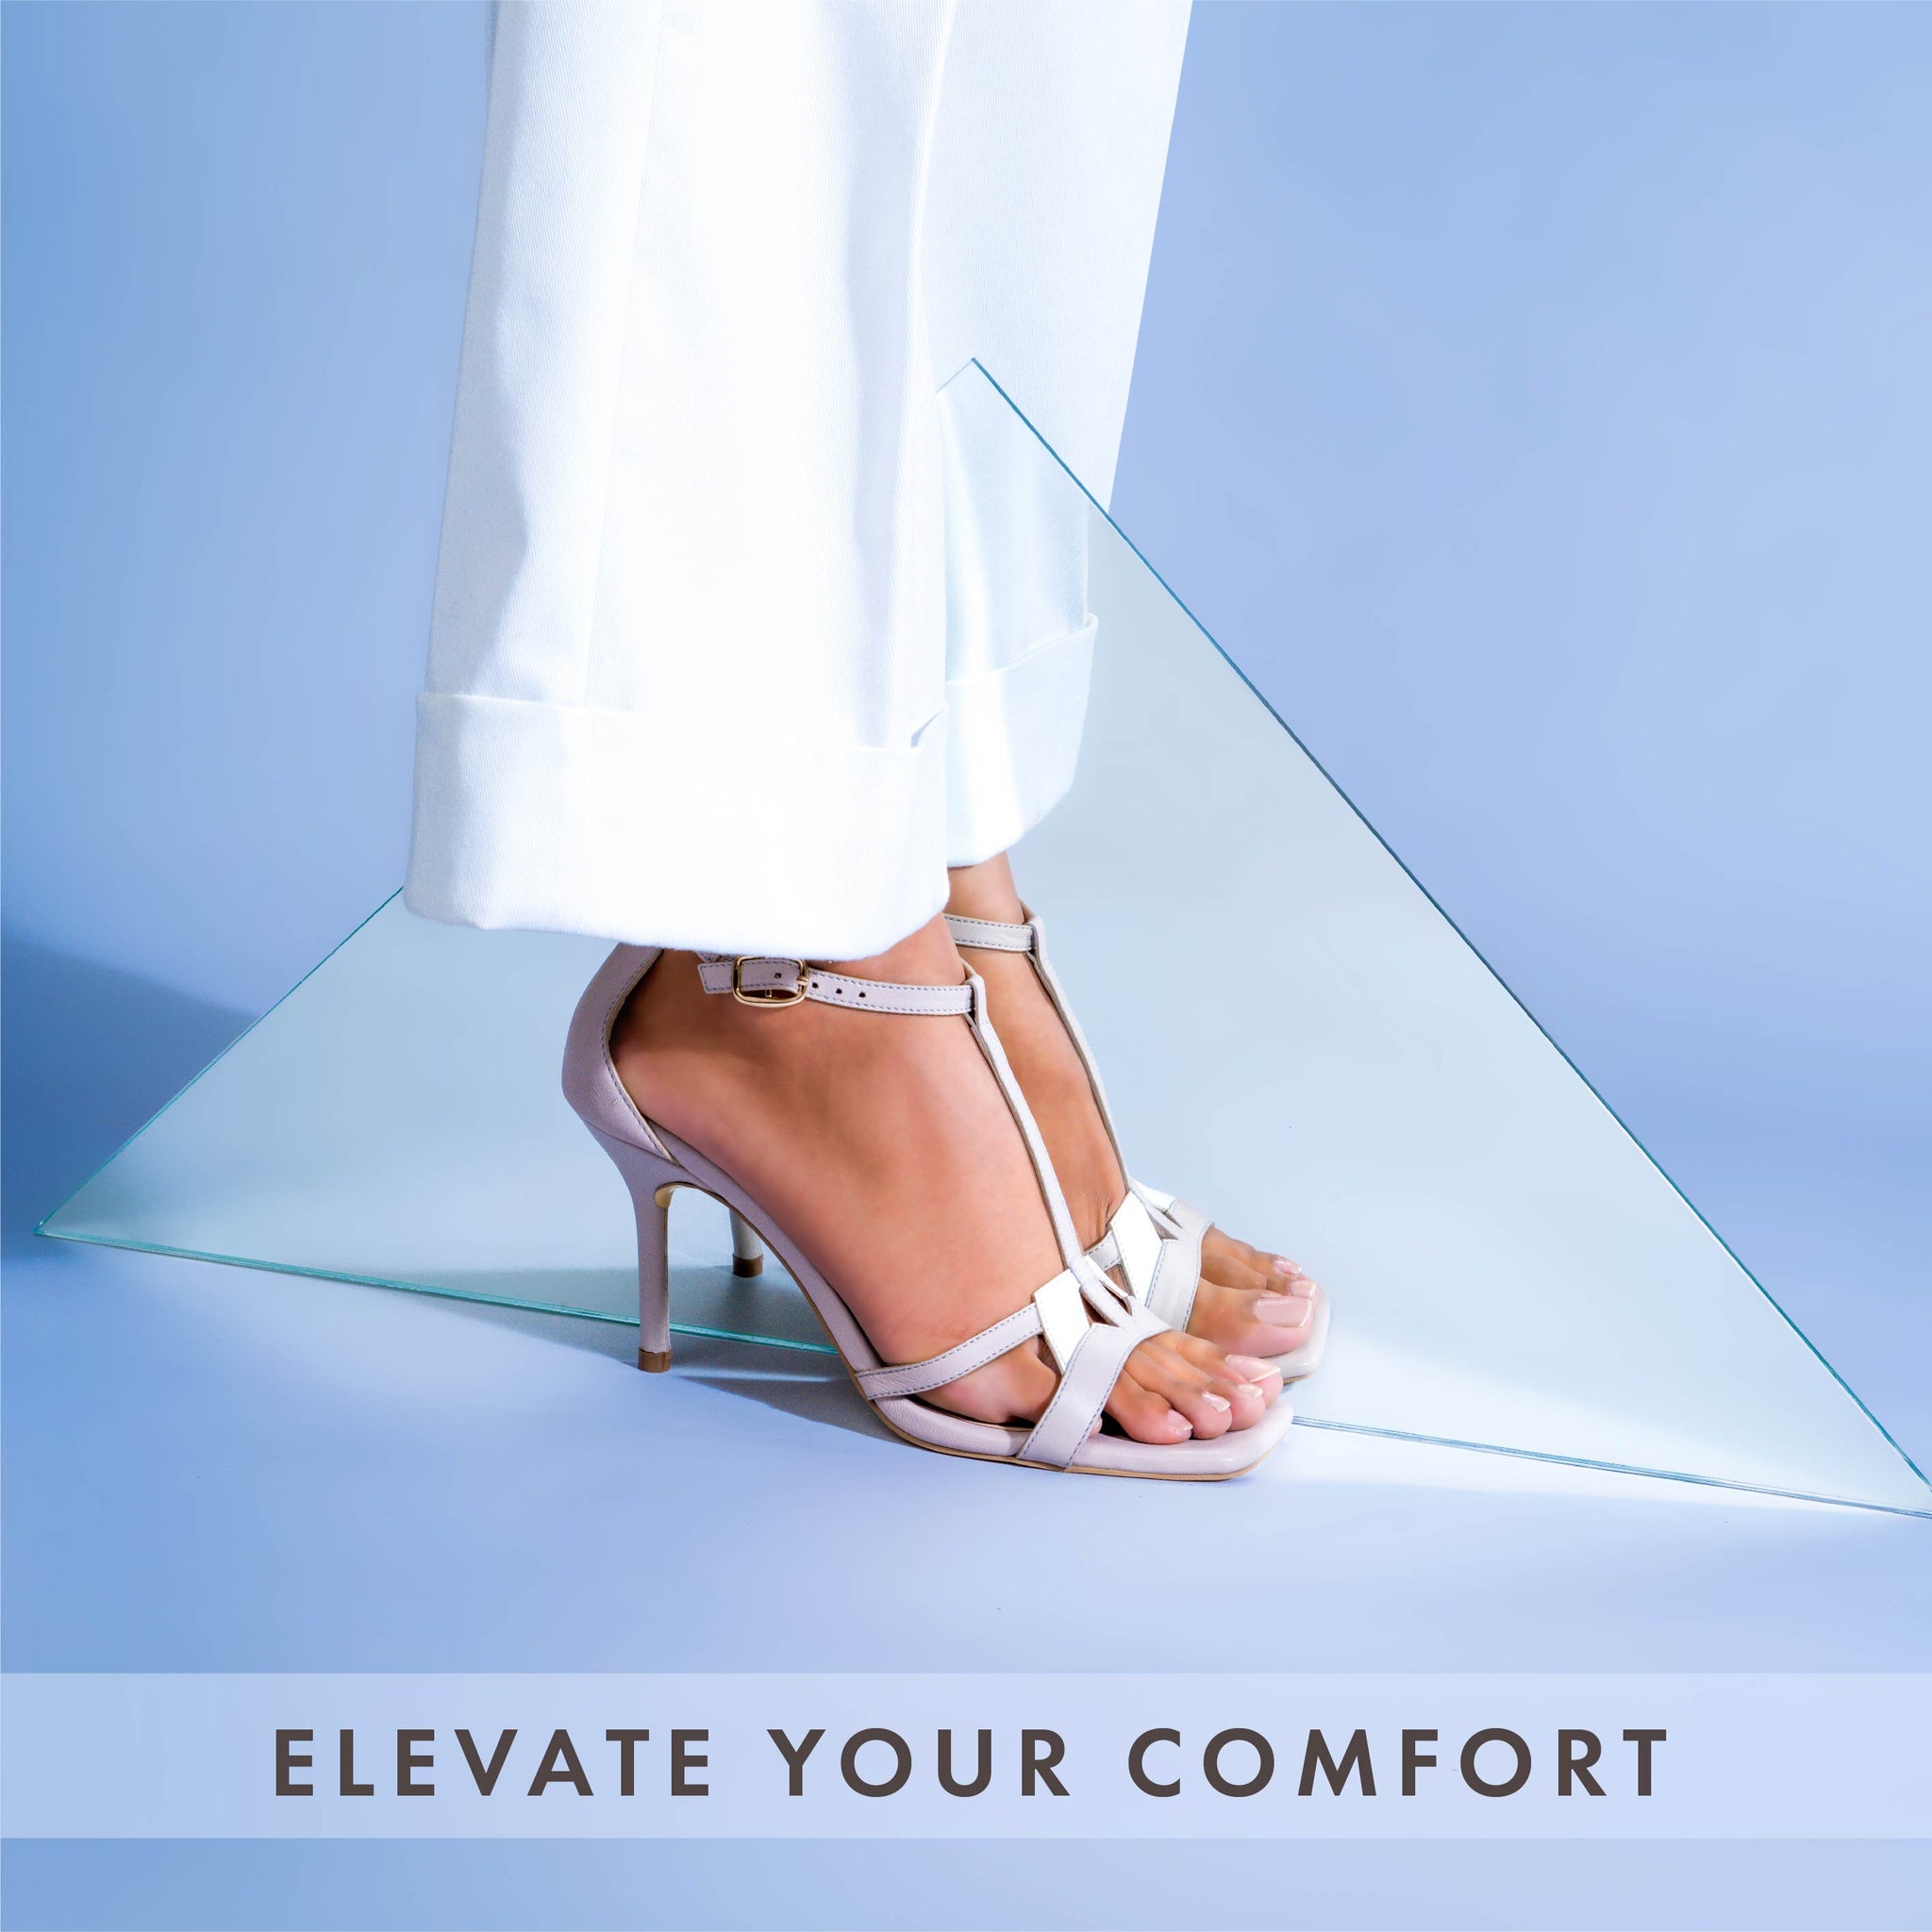 The secret to making high heels more comfortable